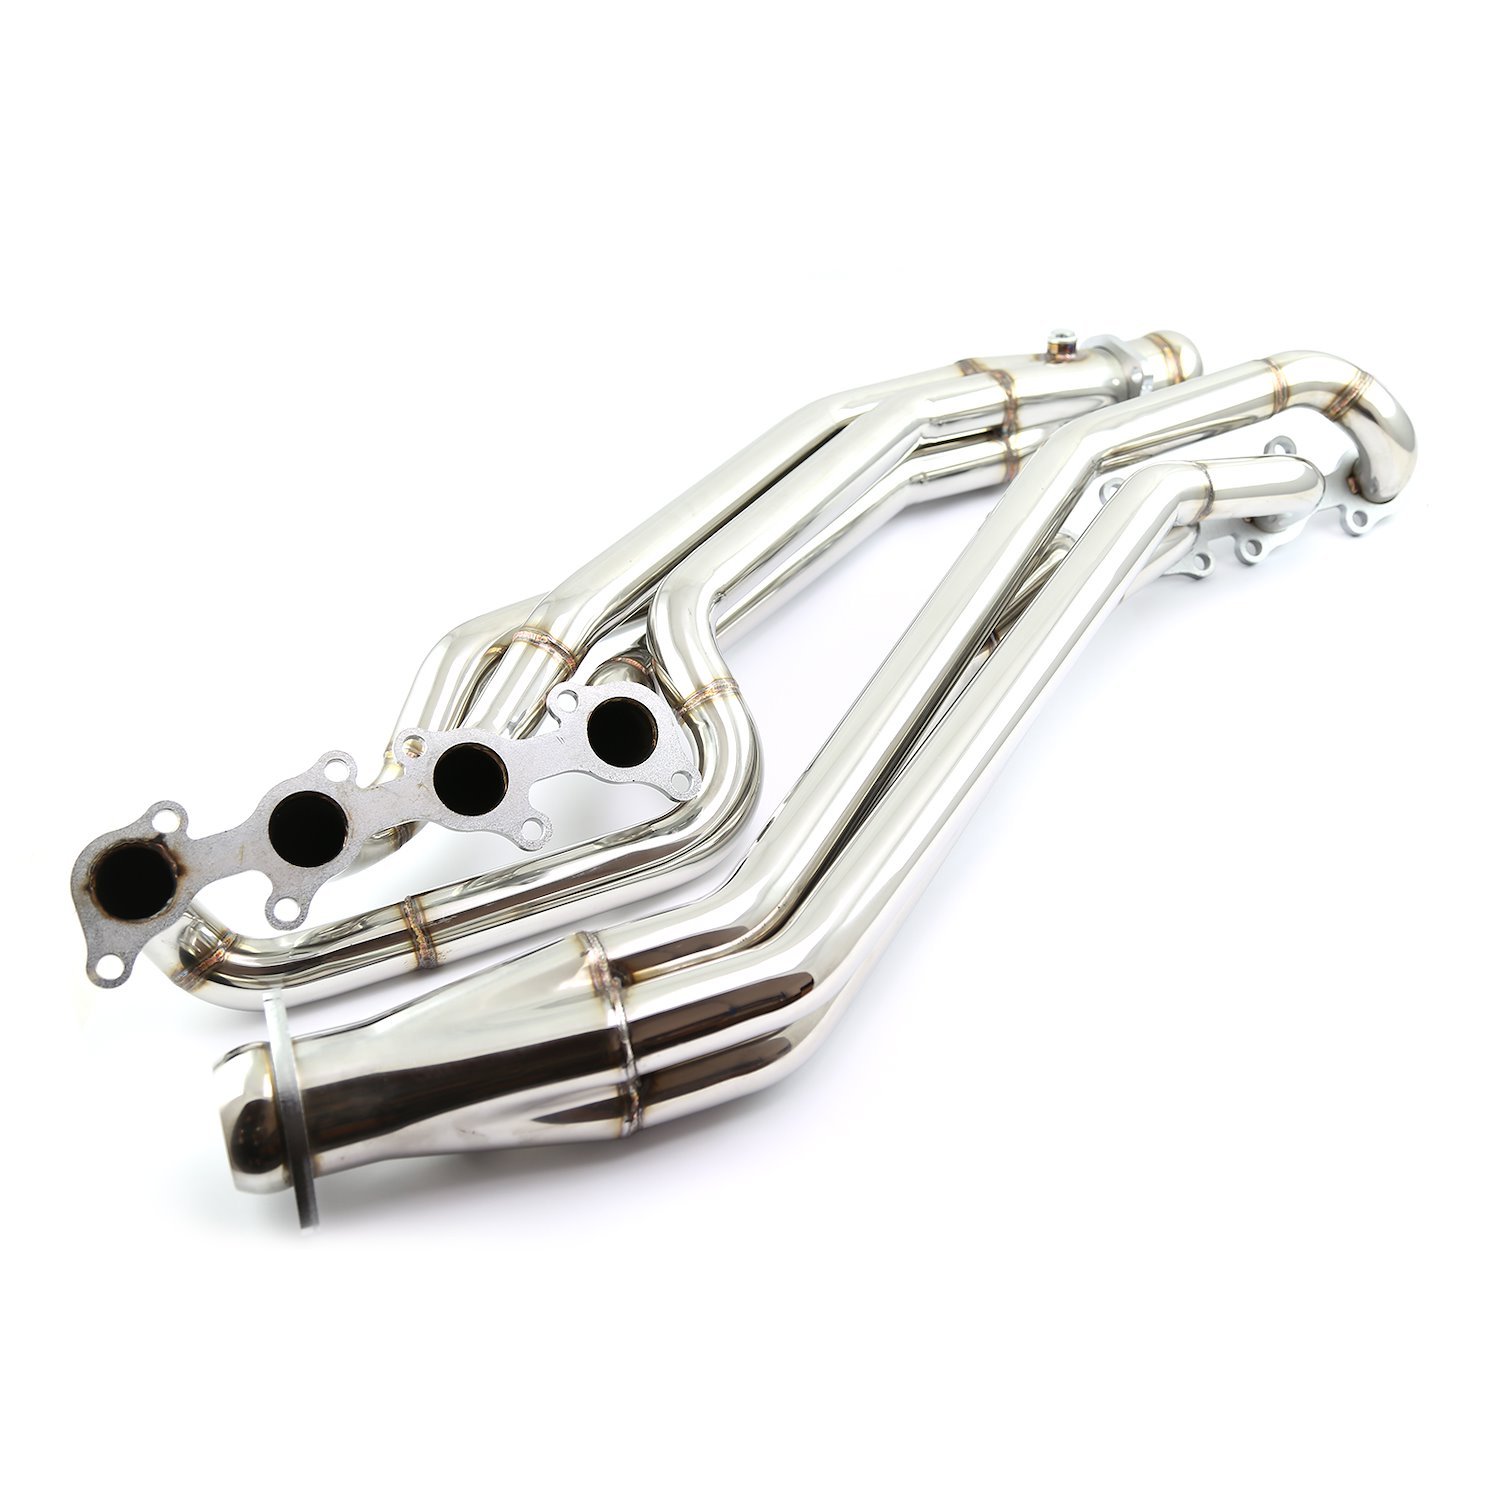 Ford Mustang 2011-2013 Long Tube Stainles Steel Exhaust Header